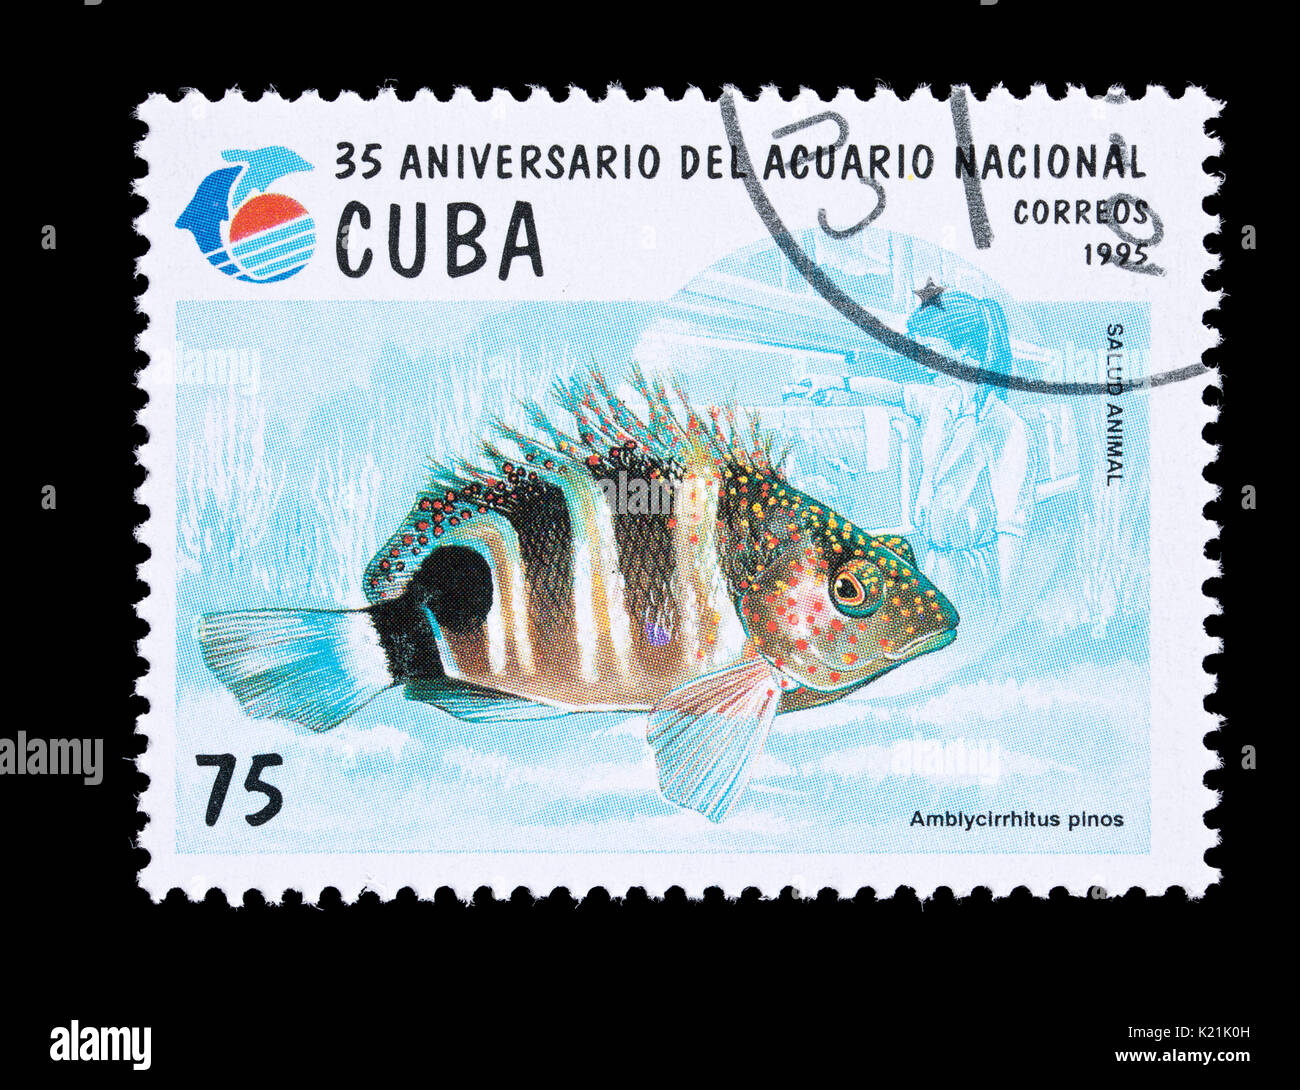 Postage stamp from Cuba depicting a (Amblycirrhitus pinos), 35'th anniversary of the National Aquarium Stock Photo